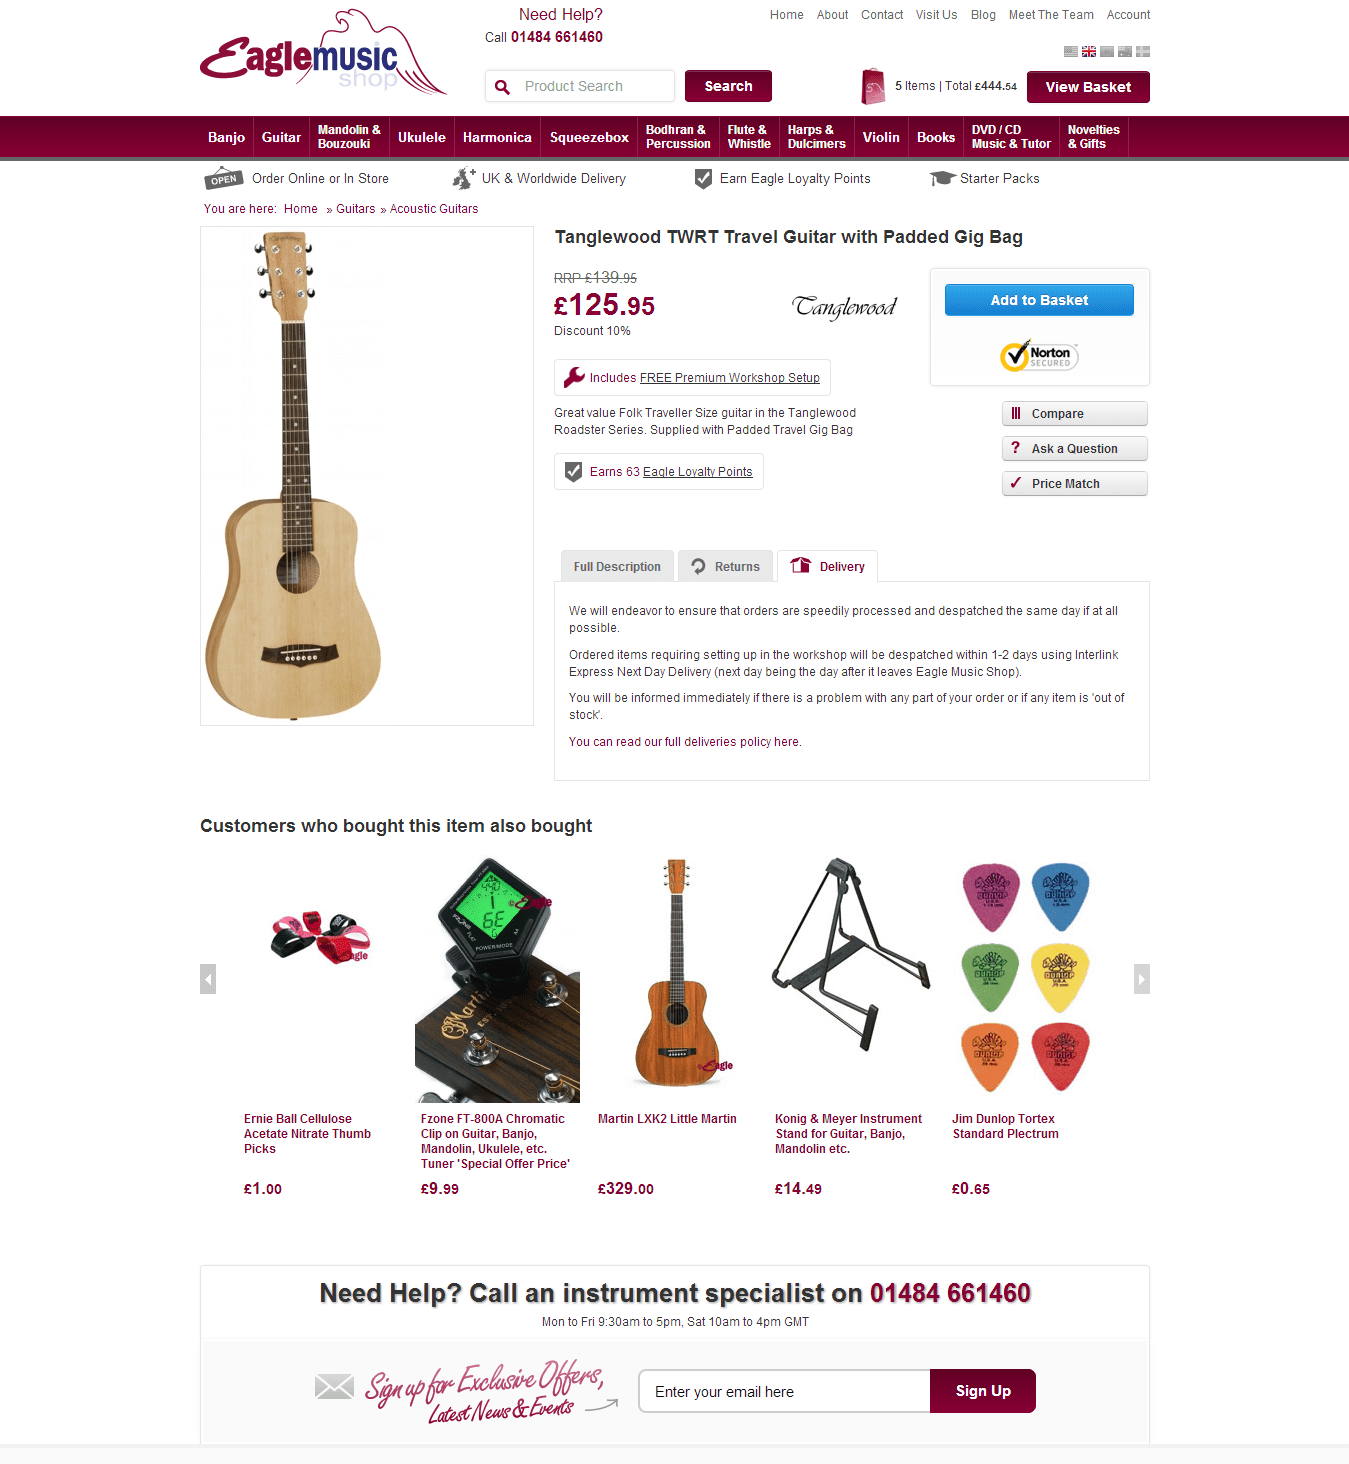 Recommend items on home page are incorrectly formatted - Website